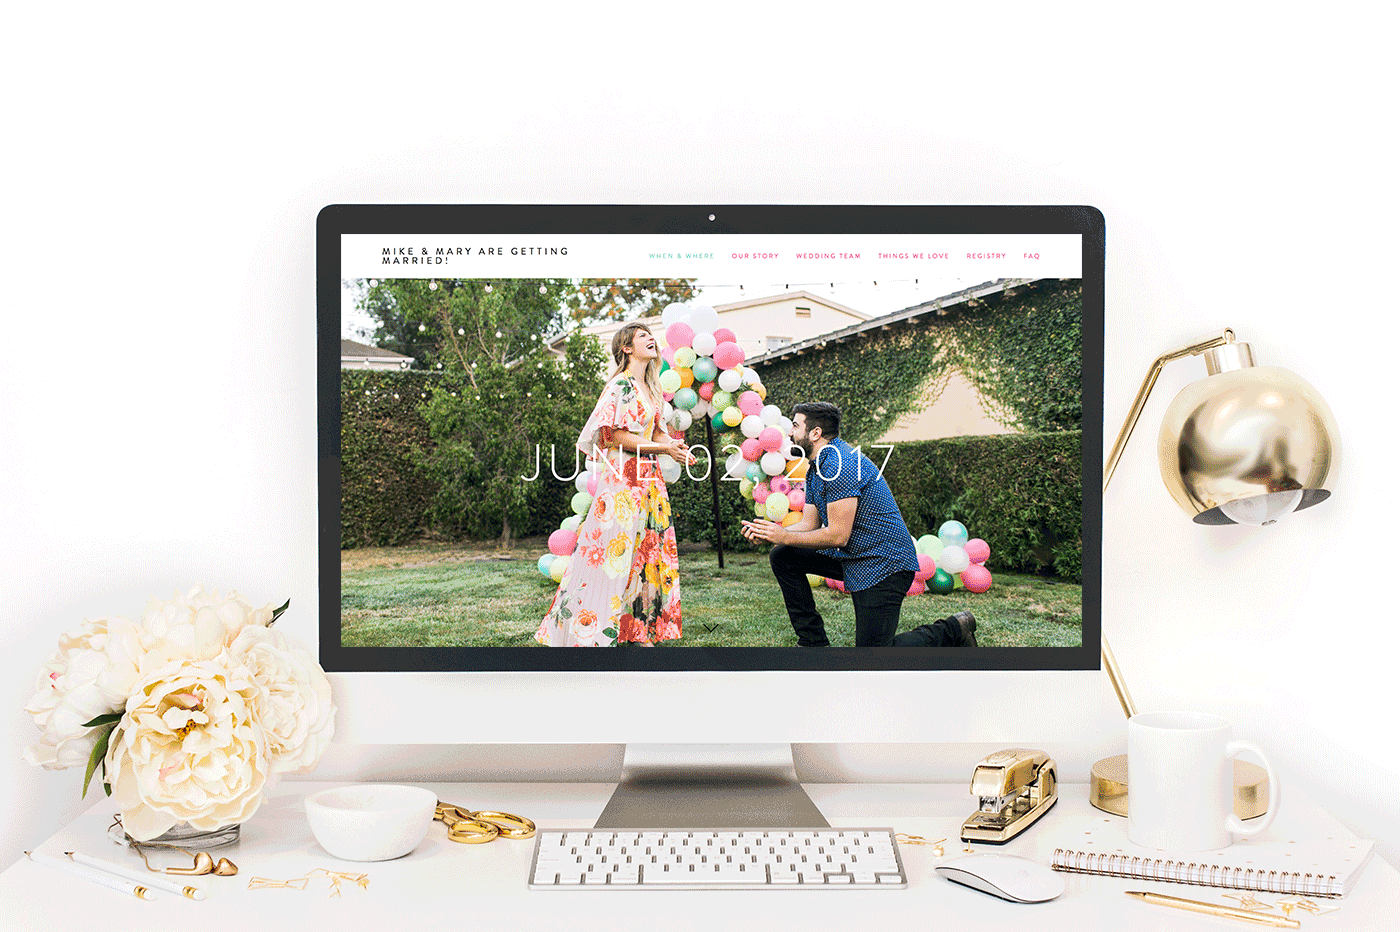 Mike + Mary's Colorful Wedding Website and Tips